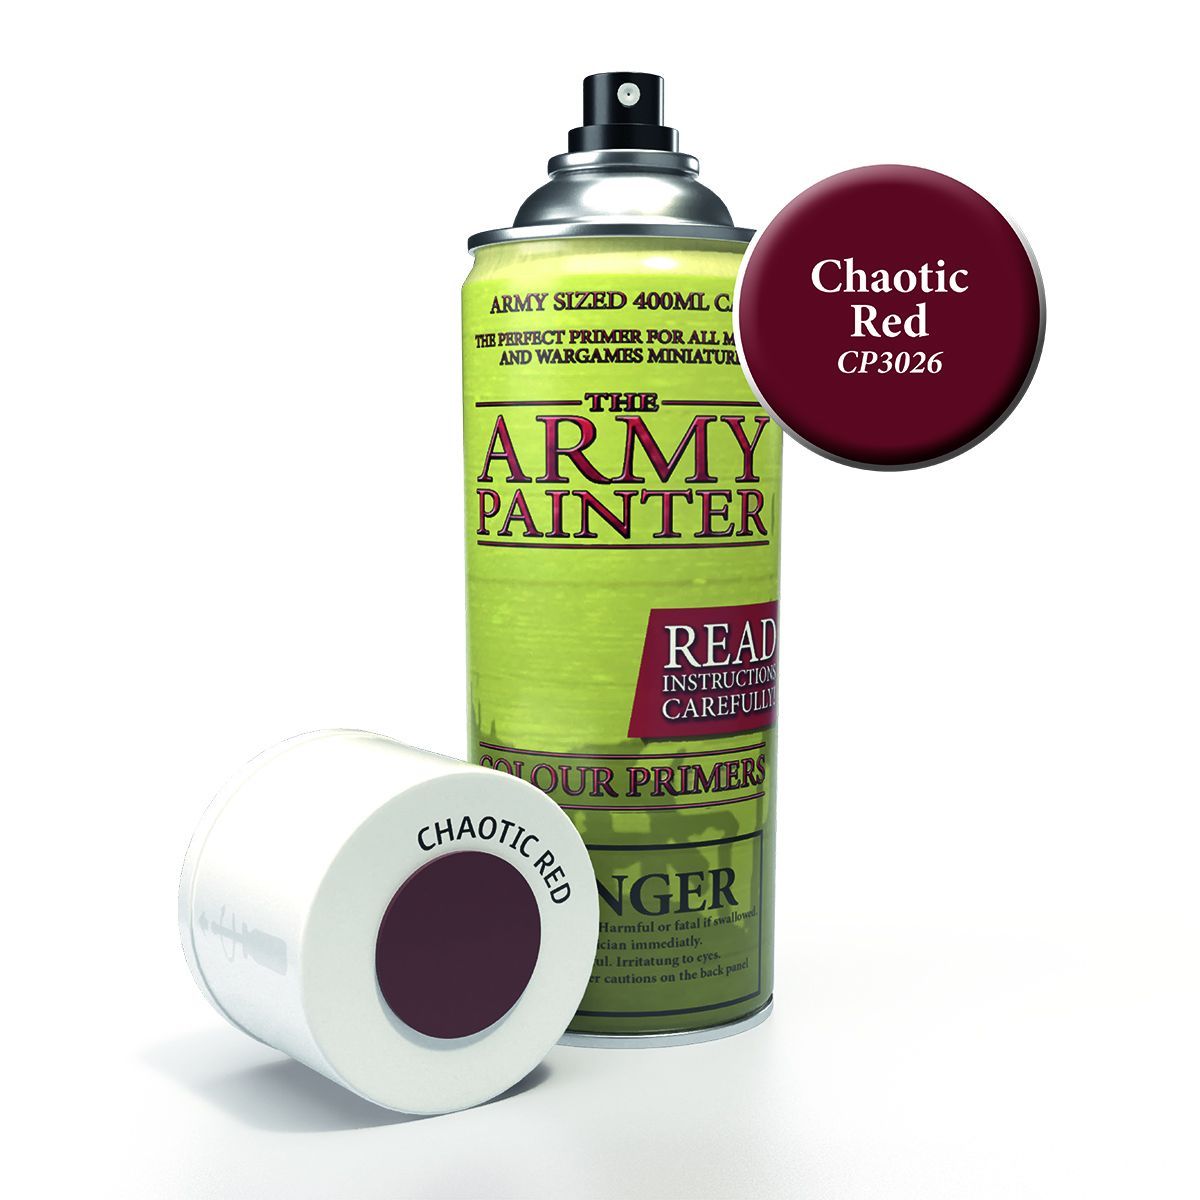 Army Painter: Colour Primer Spray Chaotic Red 400ml